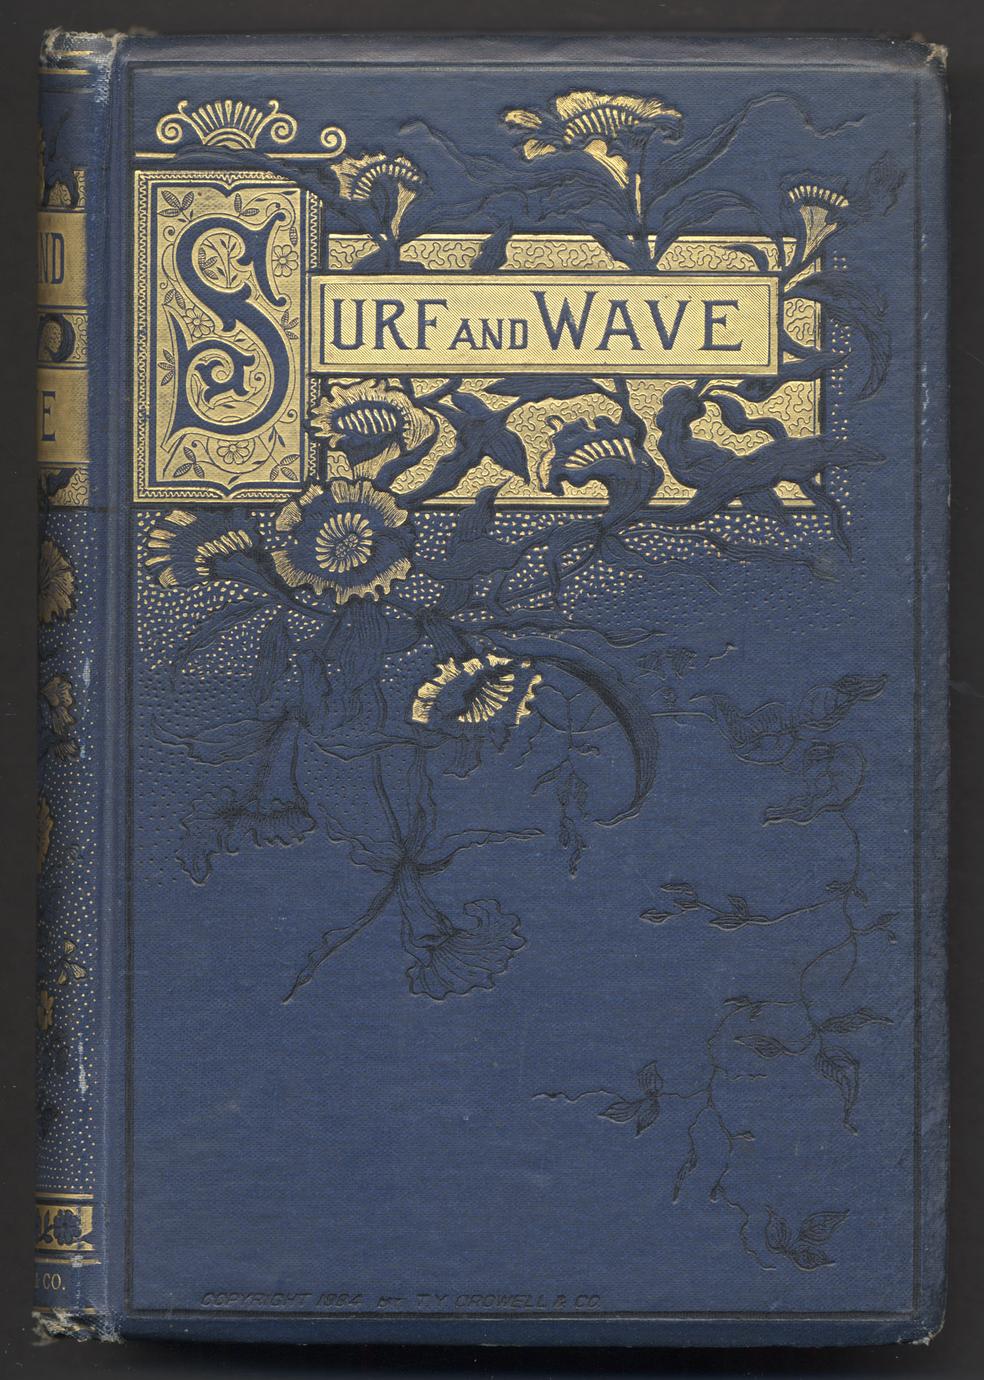 Surf and wave : the sea as sung by the poets (1 of 3)